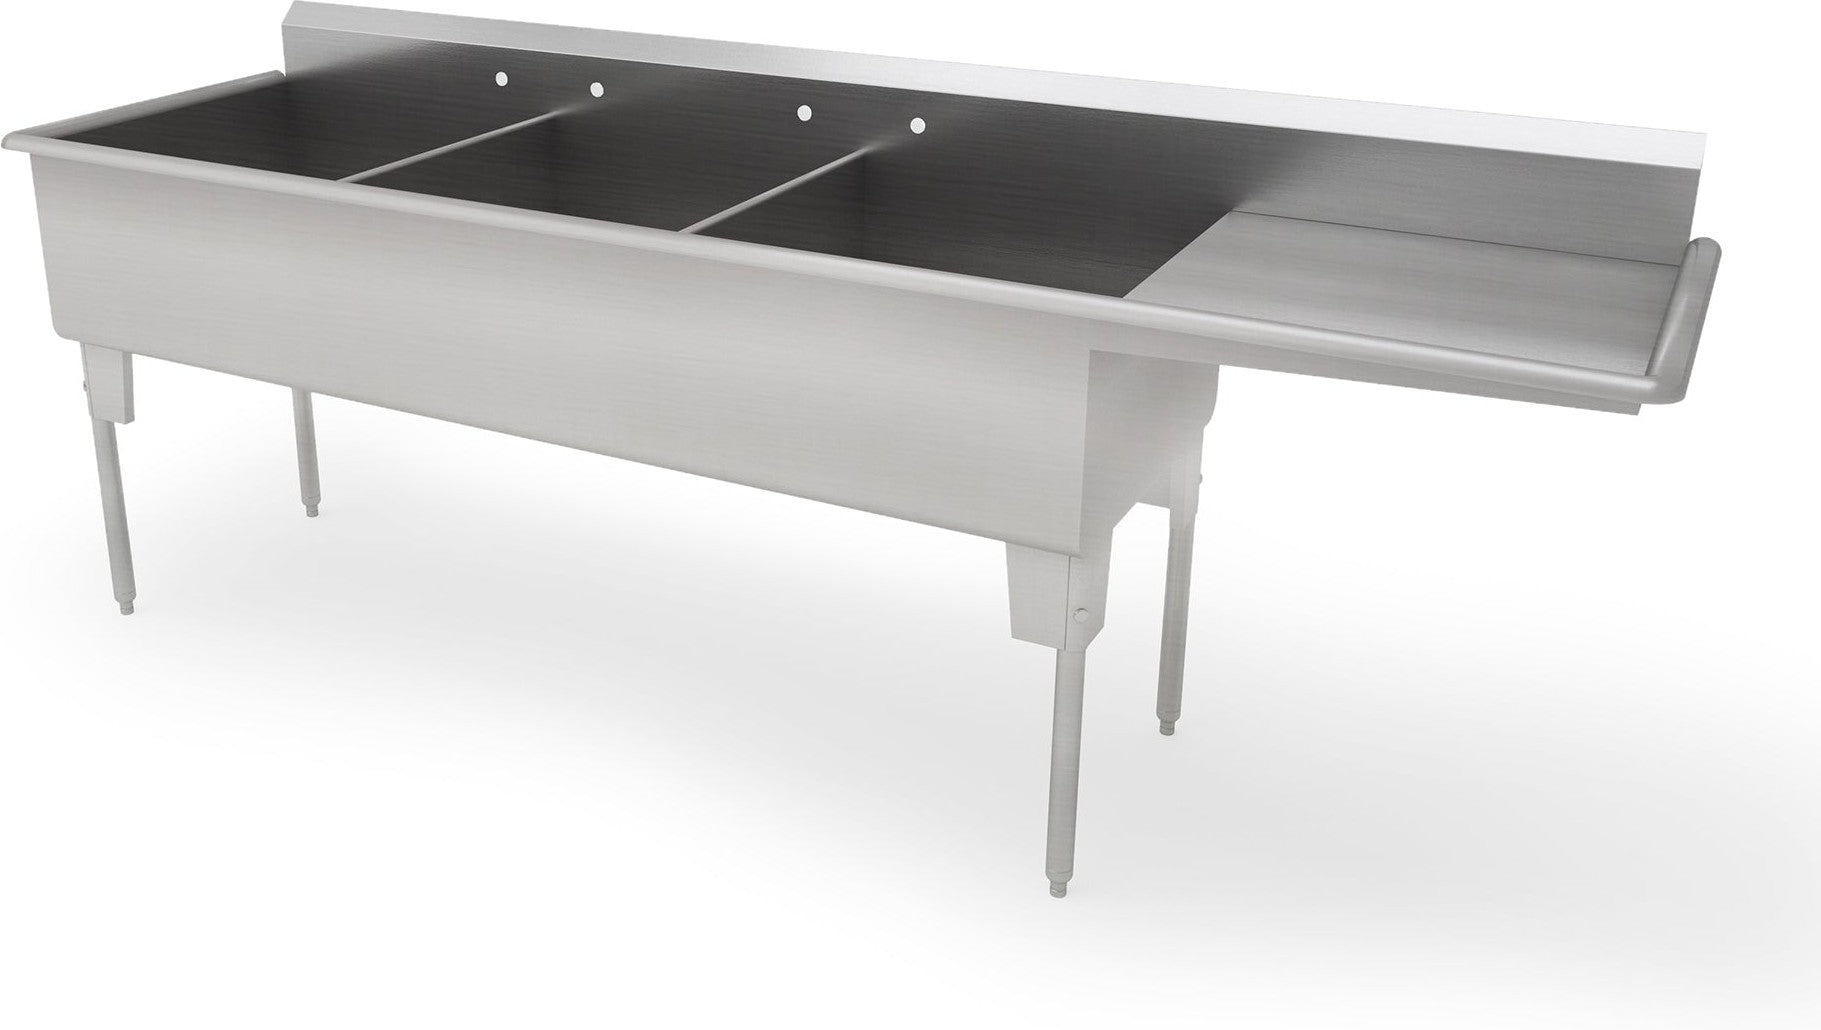 Franesse - 24" x 24" x 14" Triple Compartment Sink With Drainboard - T2472-14-DR24-M70-O